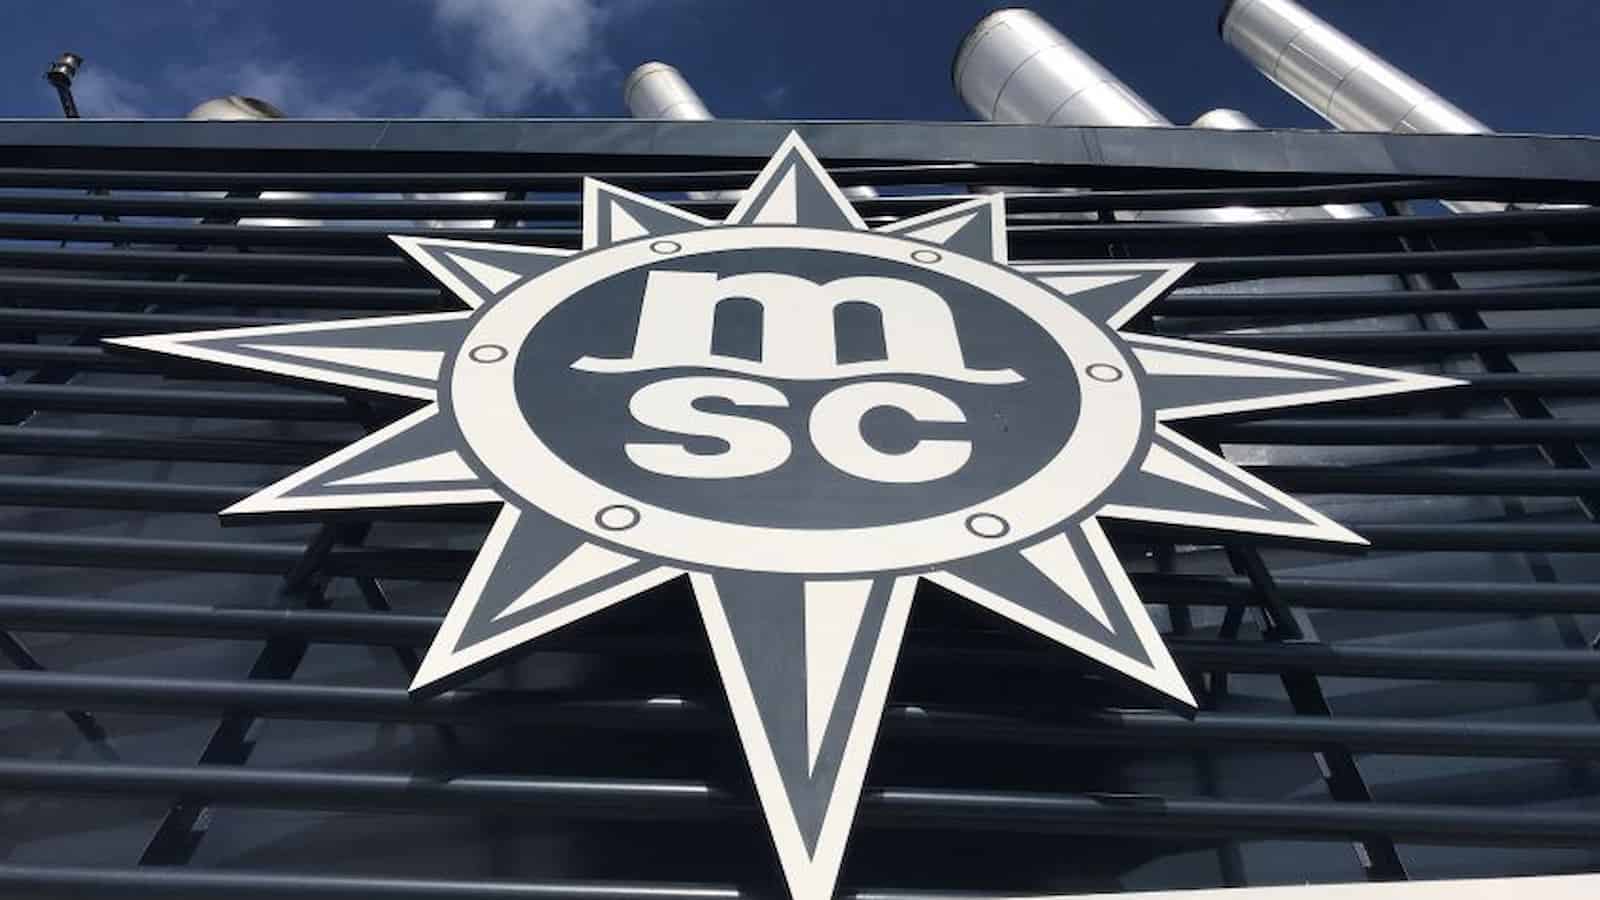 MSC Cruises to Begin Sailing from Texas in 2025